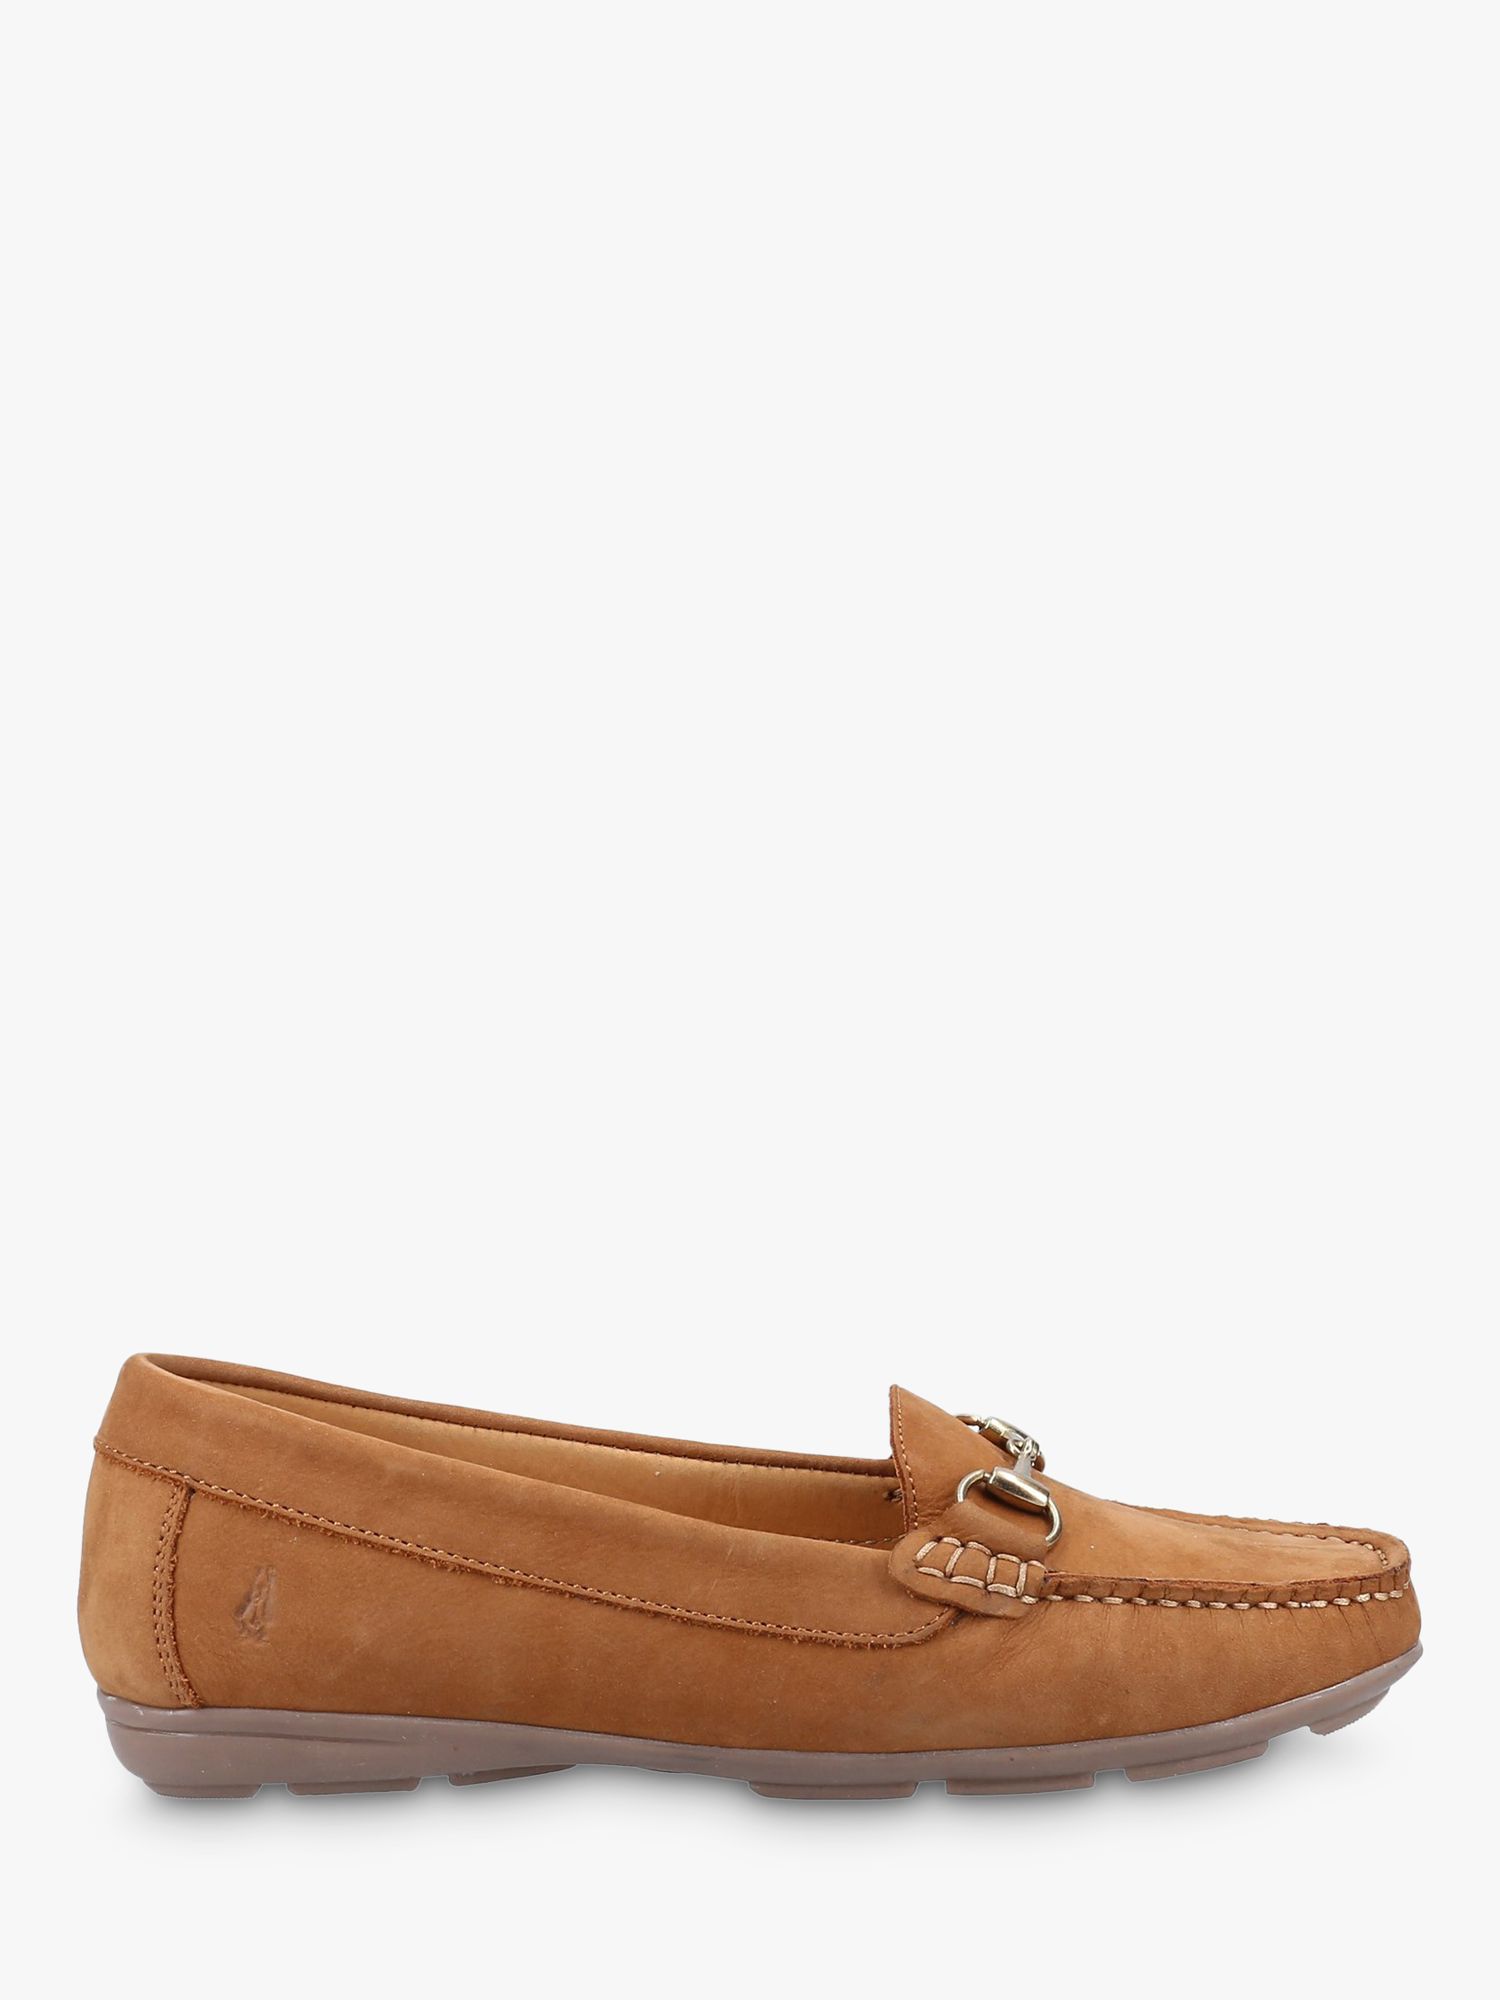 Hush Puppies Molly Snaffle Nubuck Leather Loafers, Tan, 3